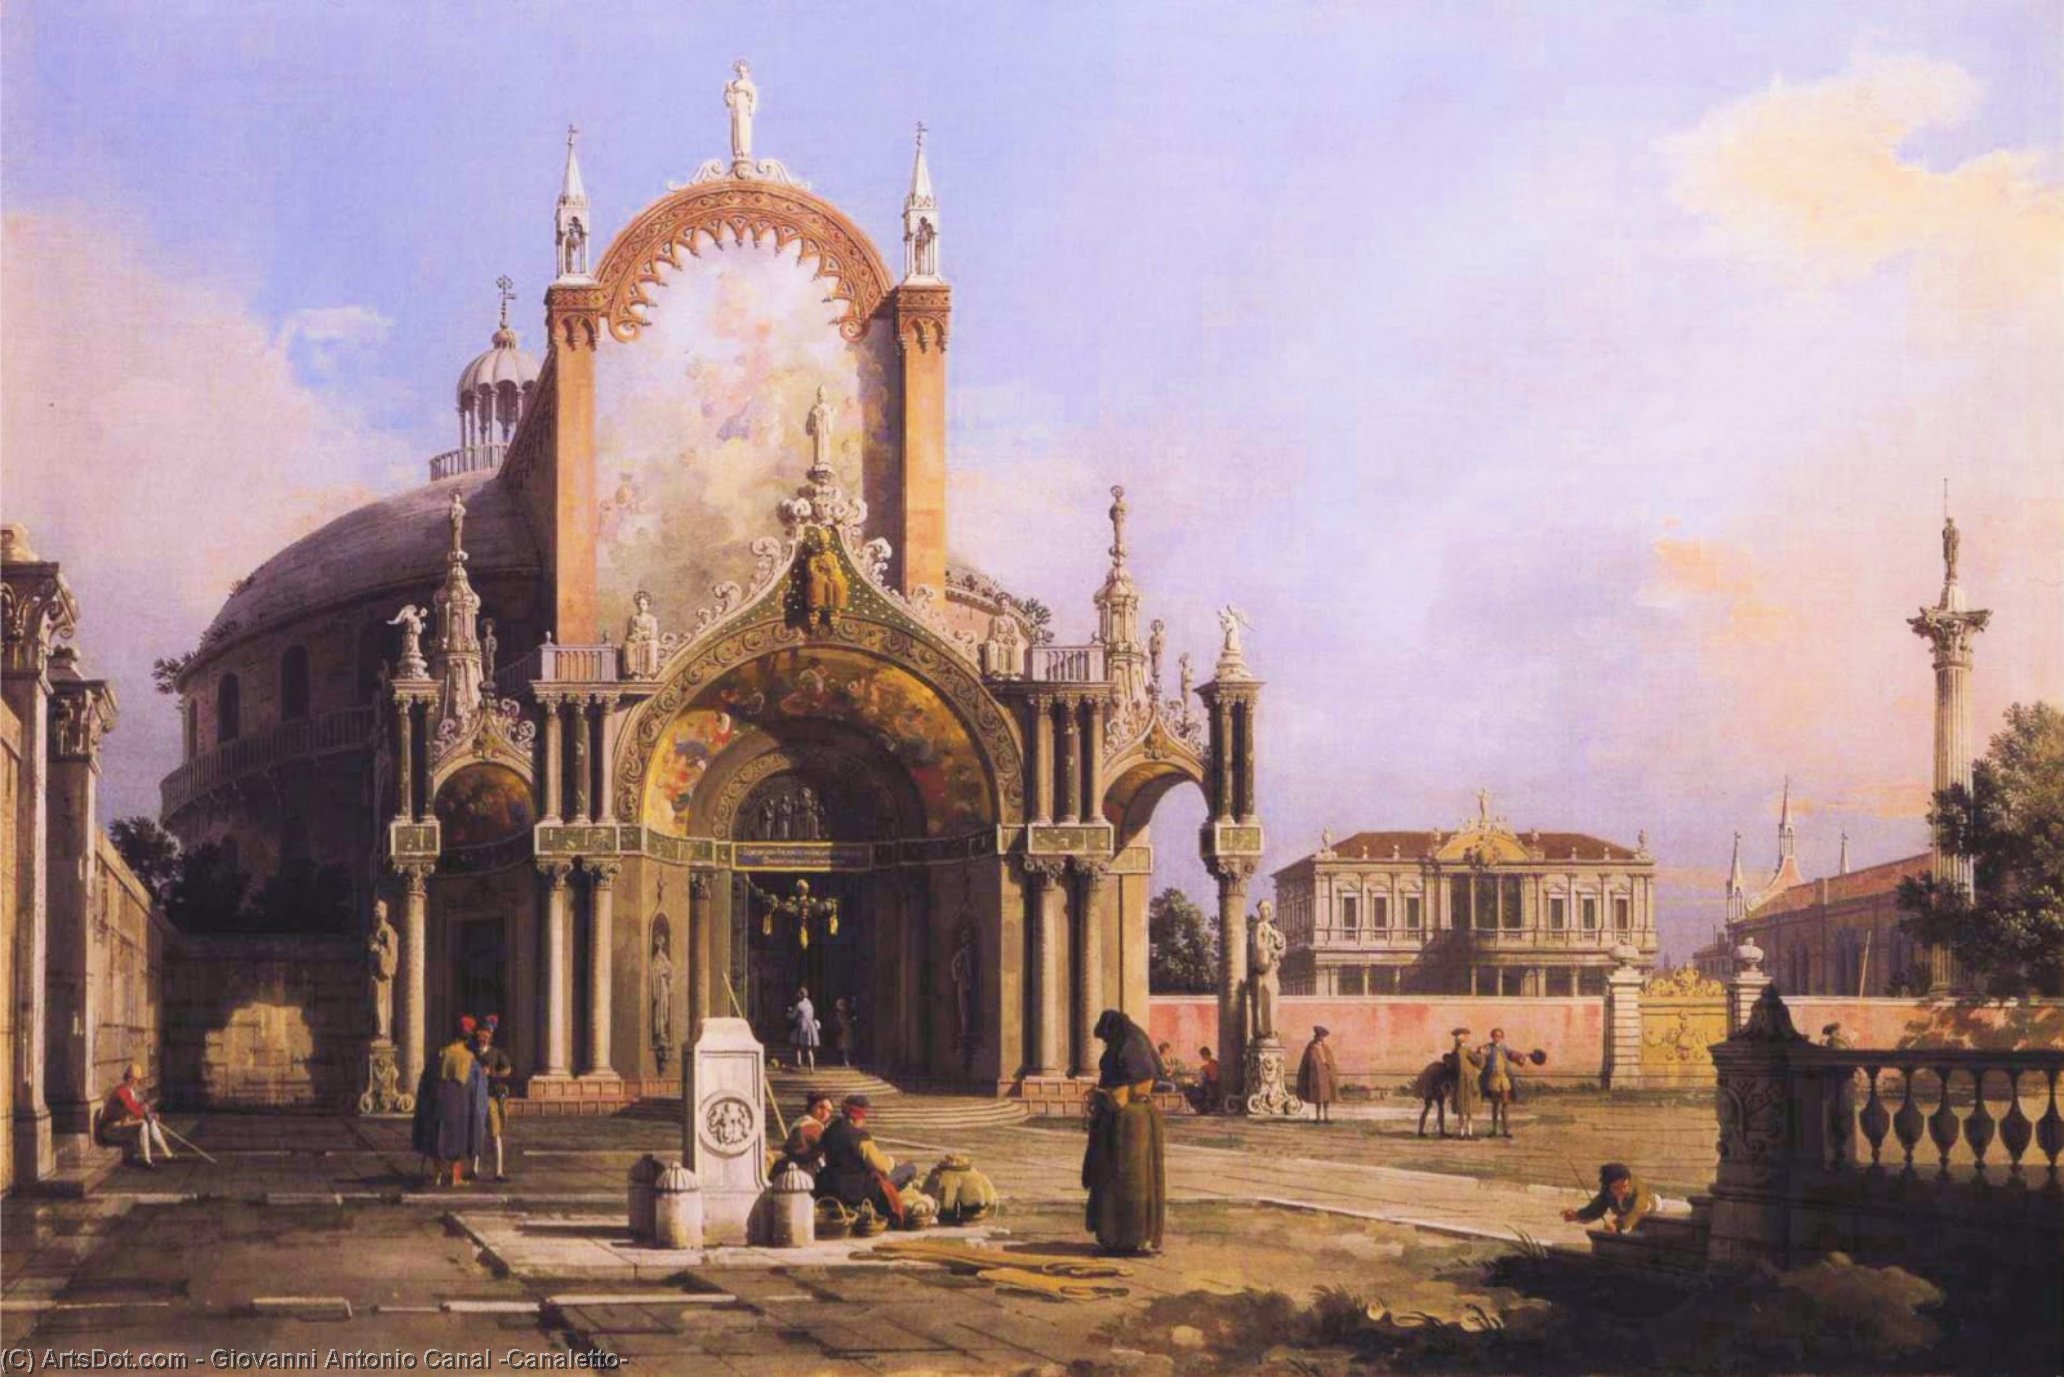 WikiOO.org - 백과 사전 - 회화, 삽화 Giovanni Antonio Canal (Canaletto) - Capriccio of a Round Church with an Elaborate Gothic Portico in a Piazza, a Palladian Piazza and a Gothic Church Beyond